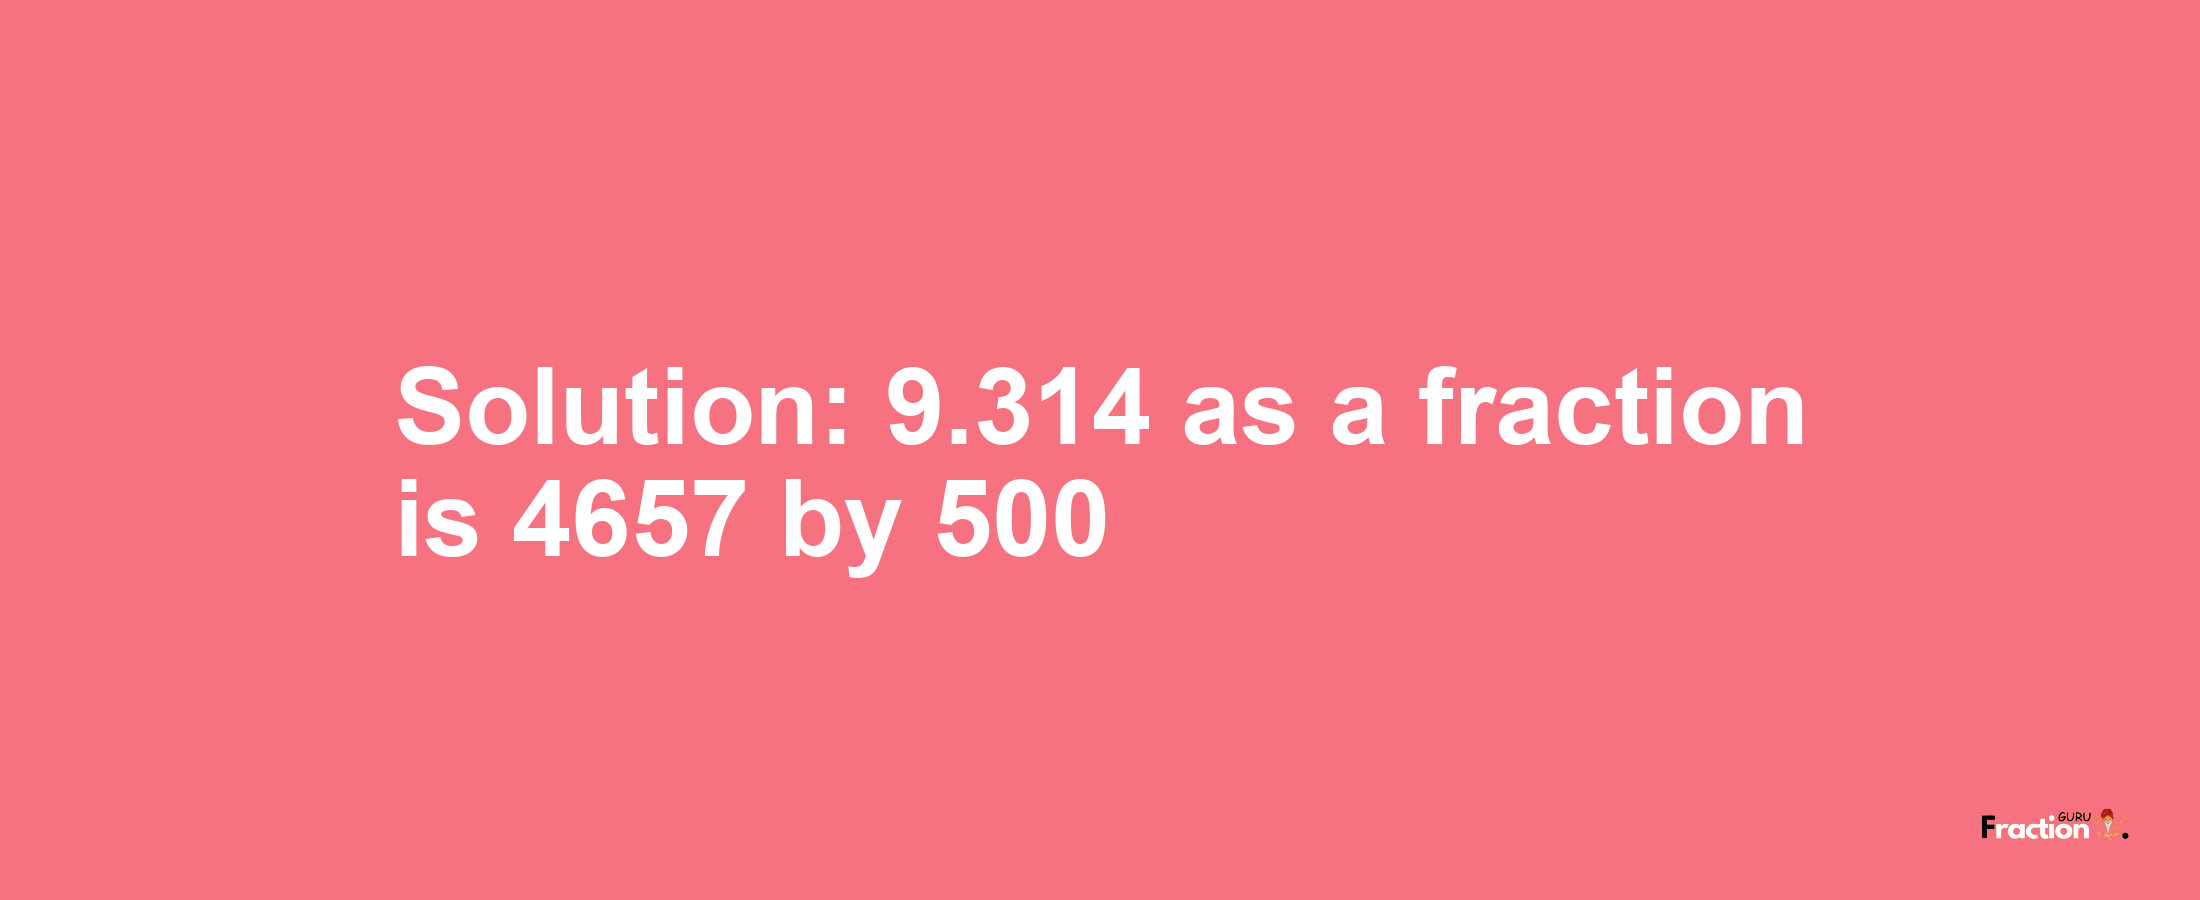 Solution:9.314 as a fraction is 4657/500